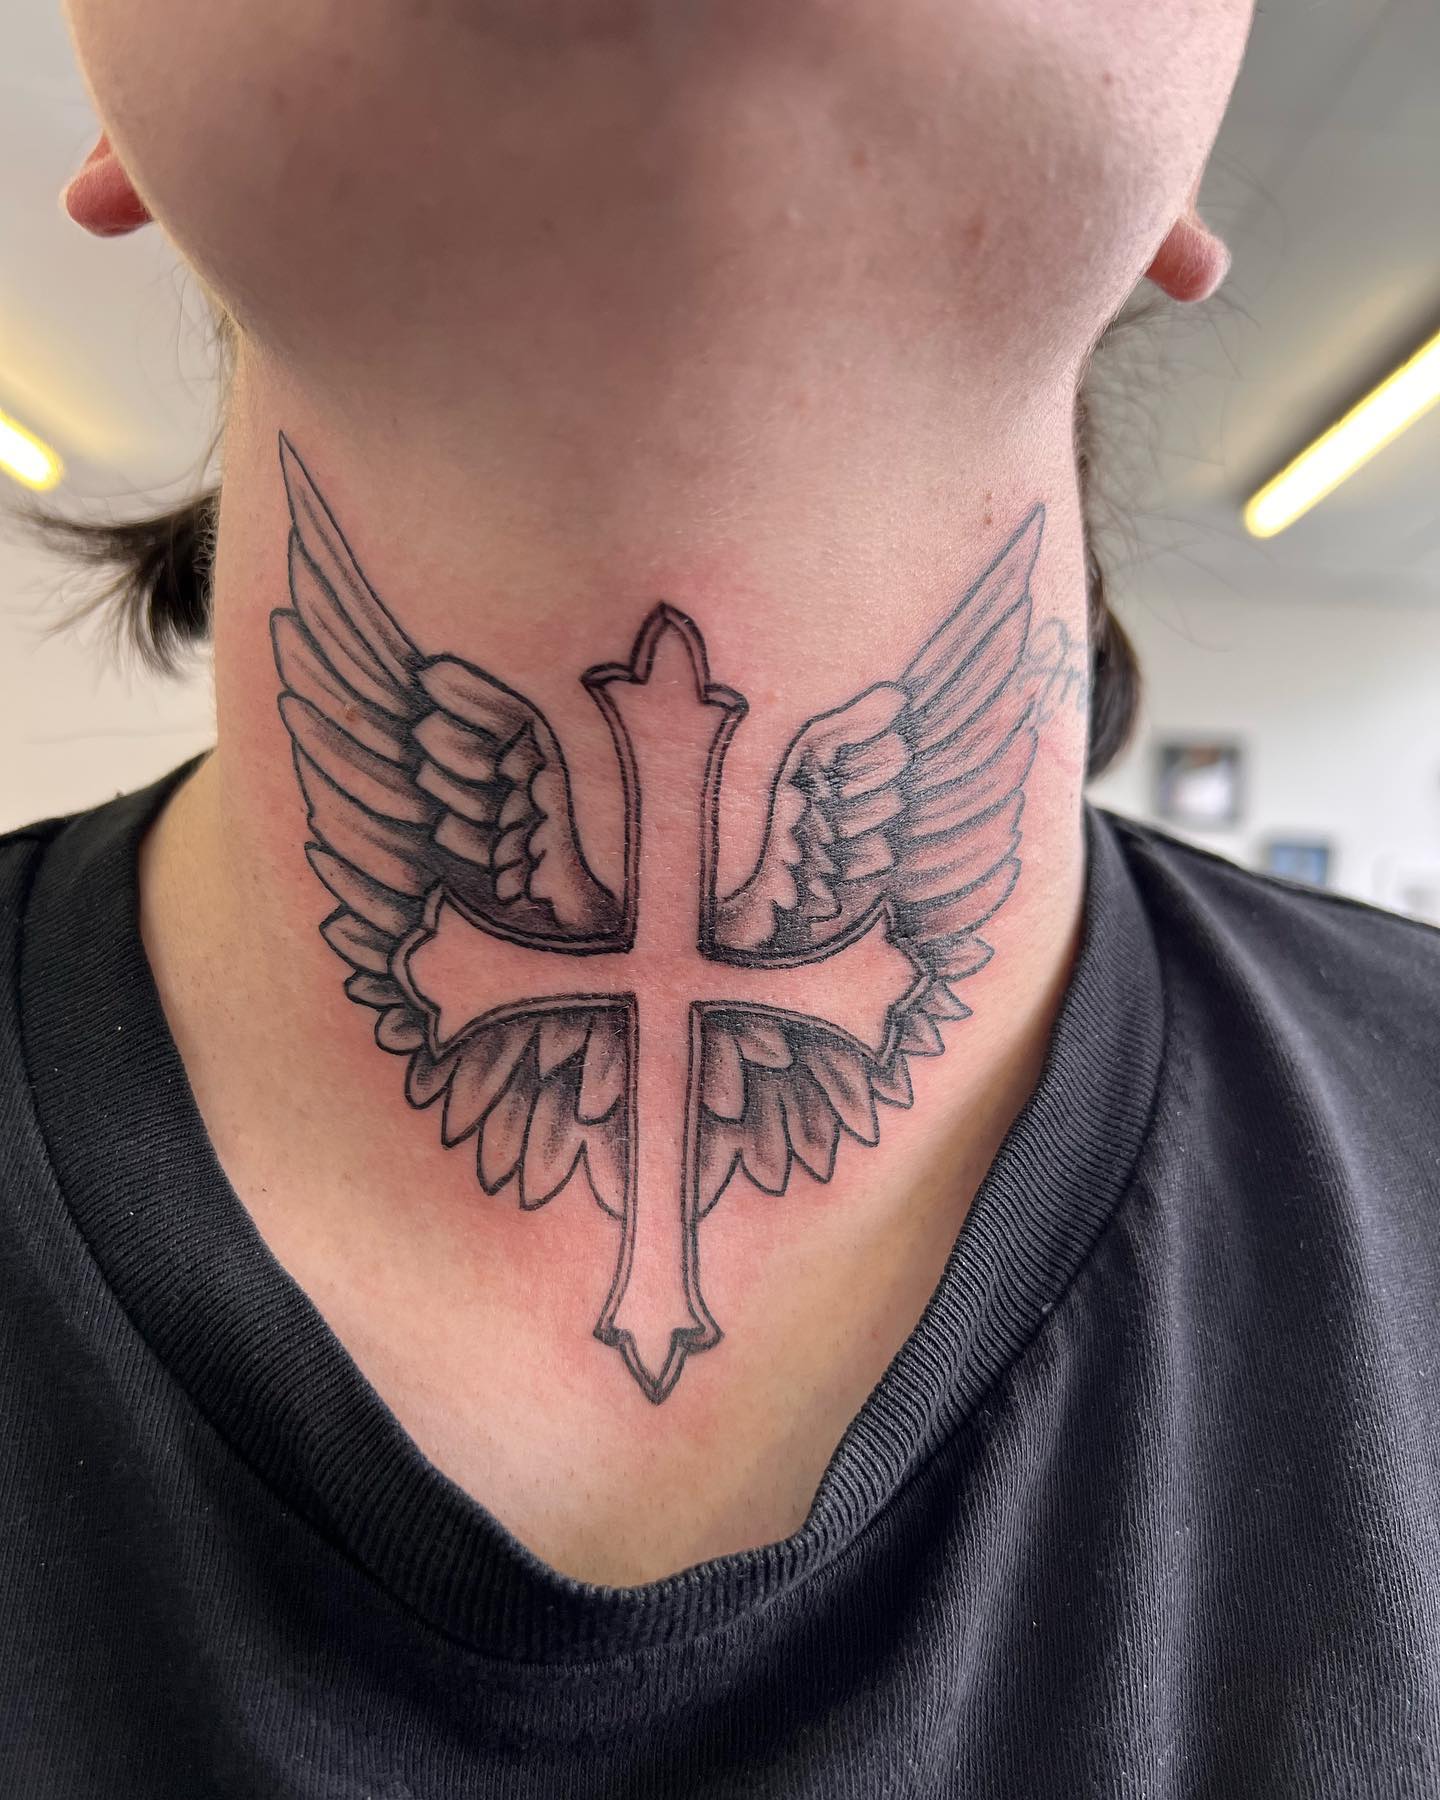 Simple It inspired throat tatty by Ronnie at Starlight Tattoo in Las  Vegas NV  rtattoos